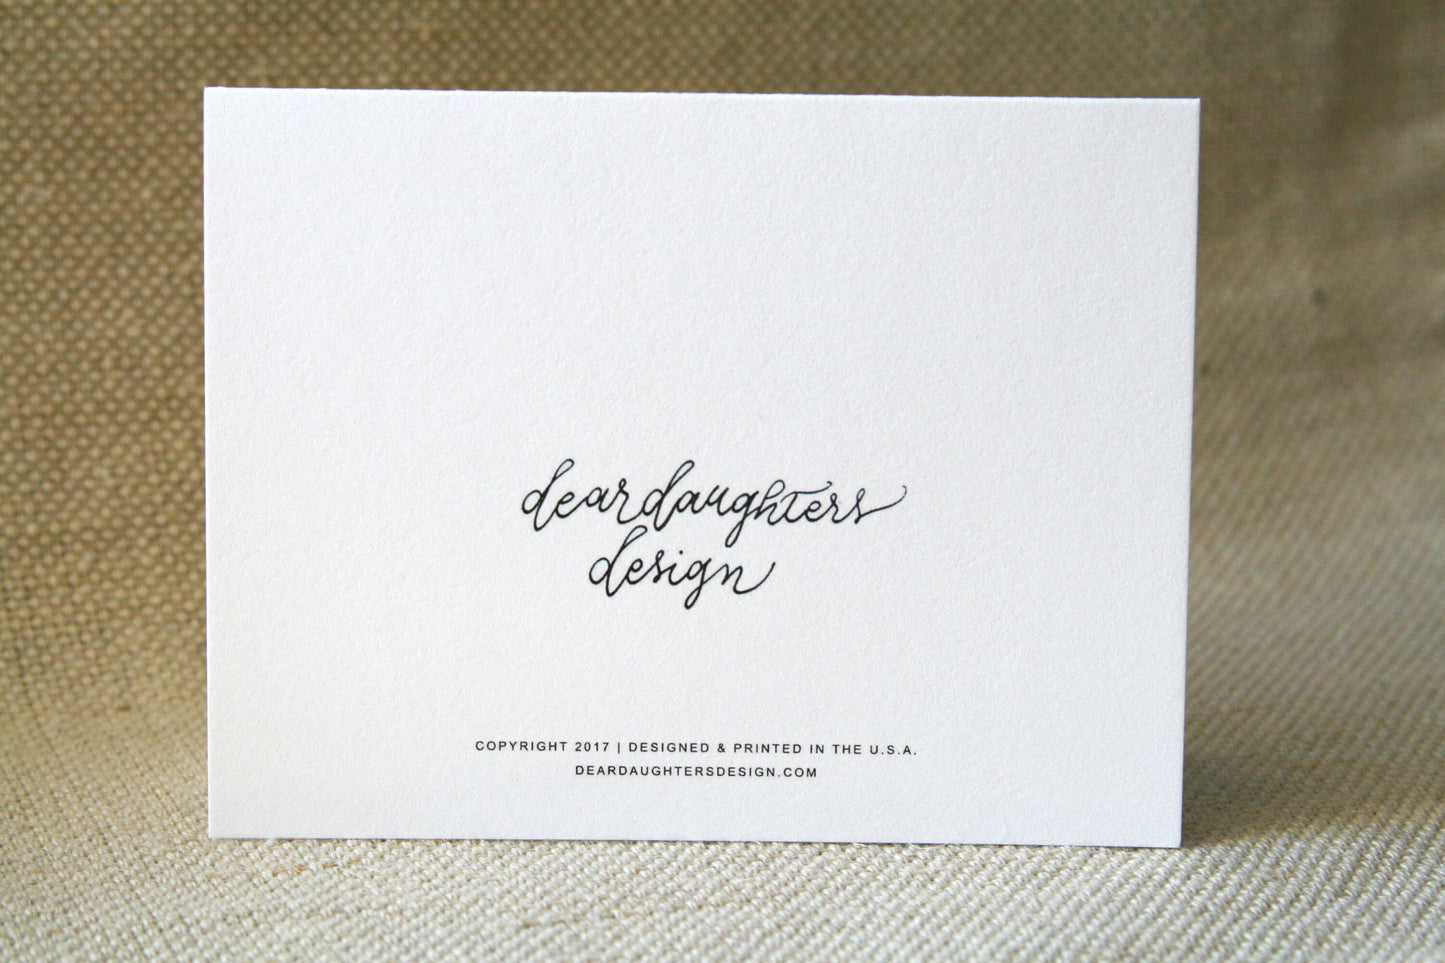 Dear Daughters Design greeting card back.